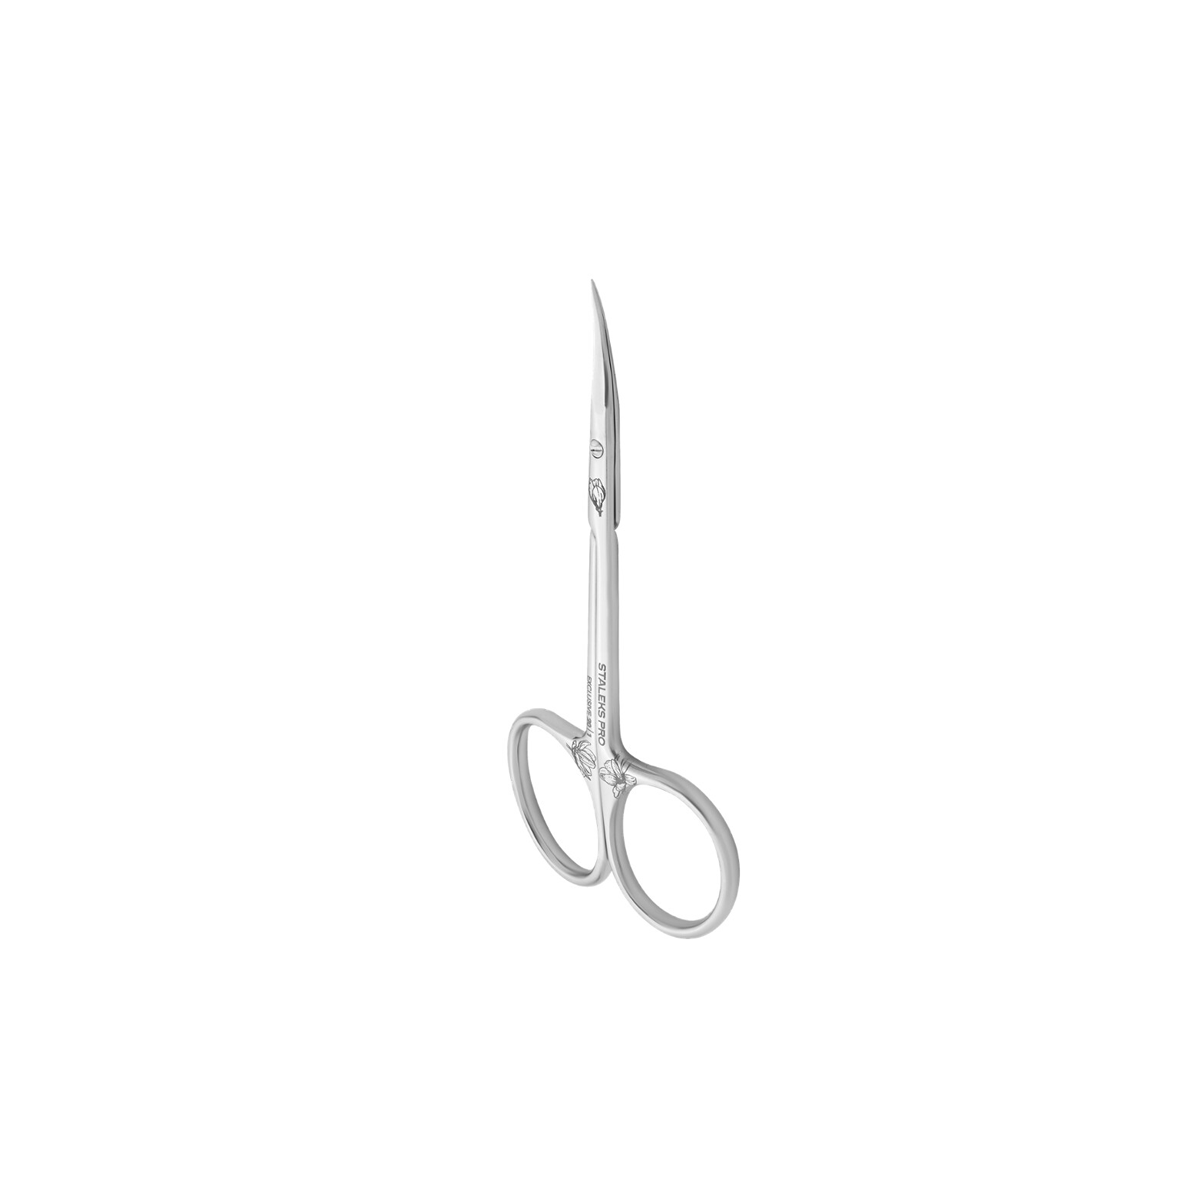    Staleks_Professional_cuticle_scissors_Exc._20_TYPE_1_Magnol._SX-20_1M product view angle